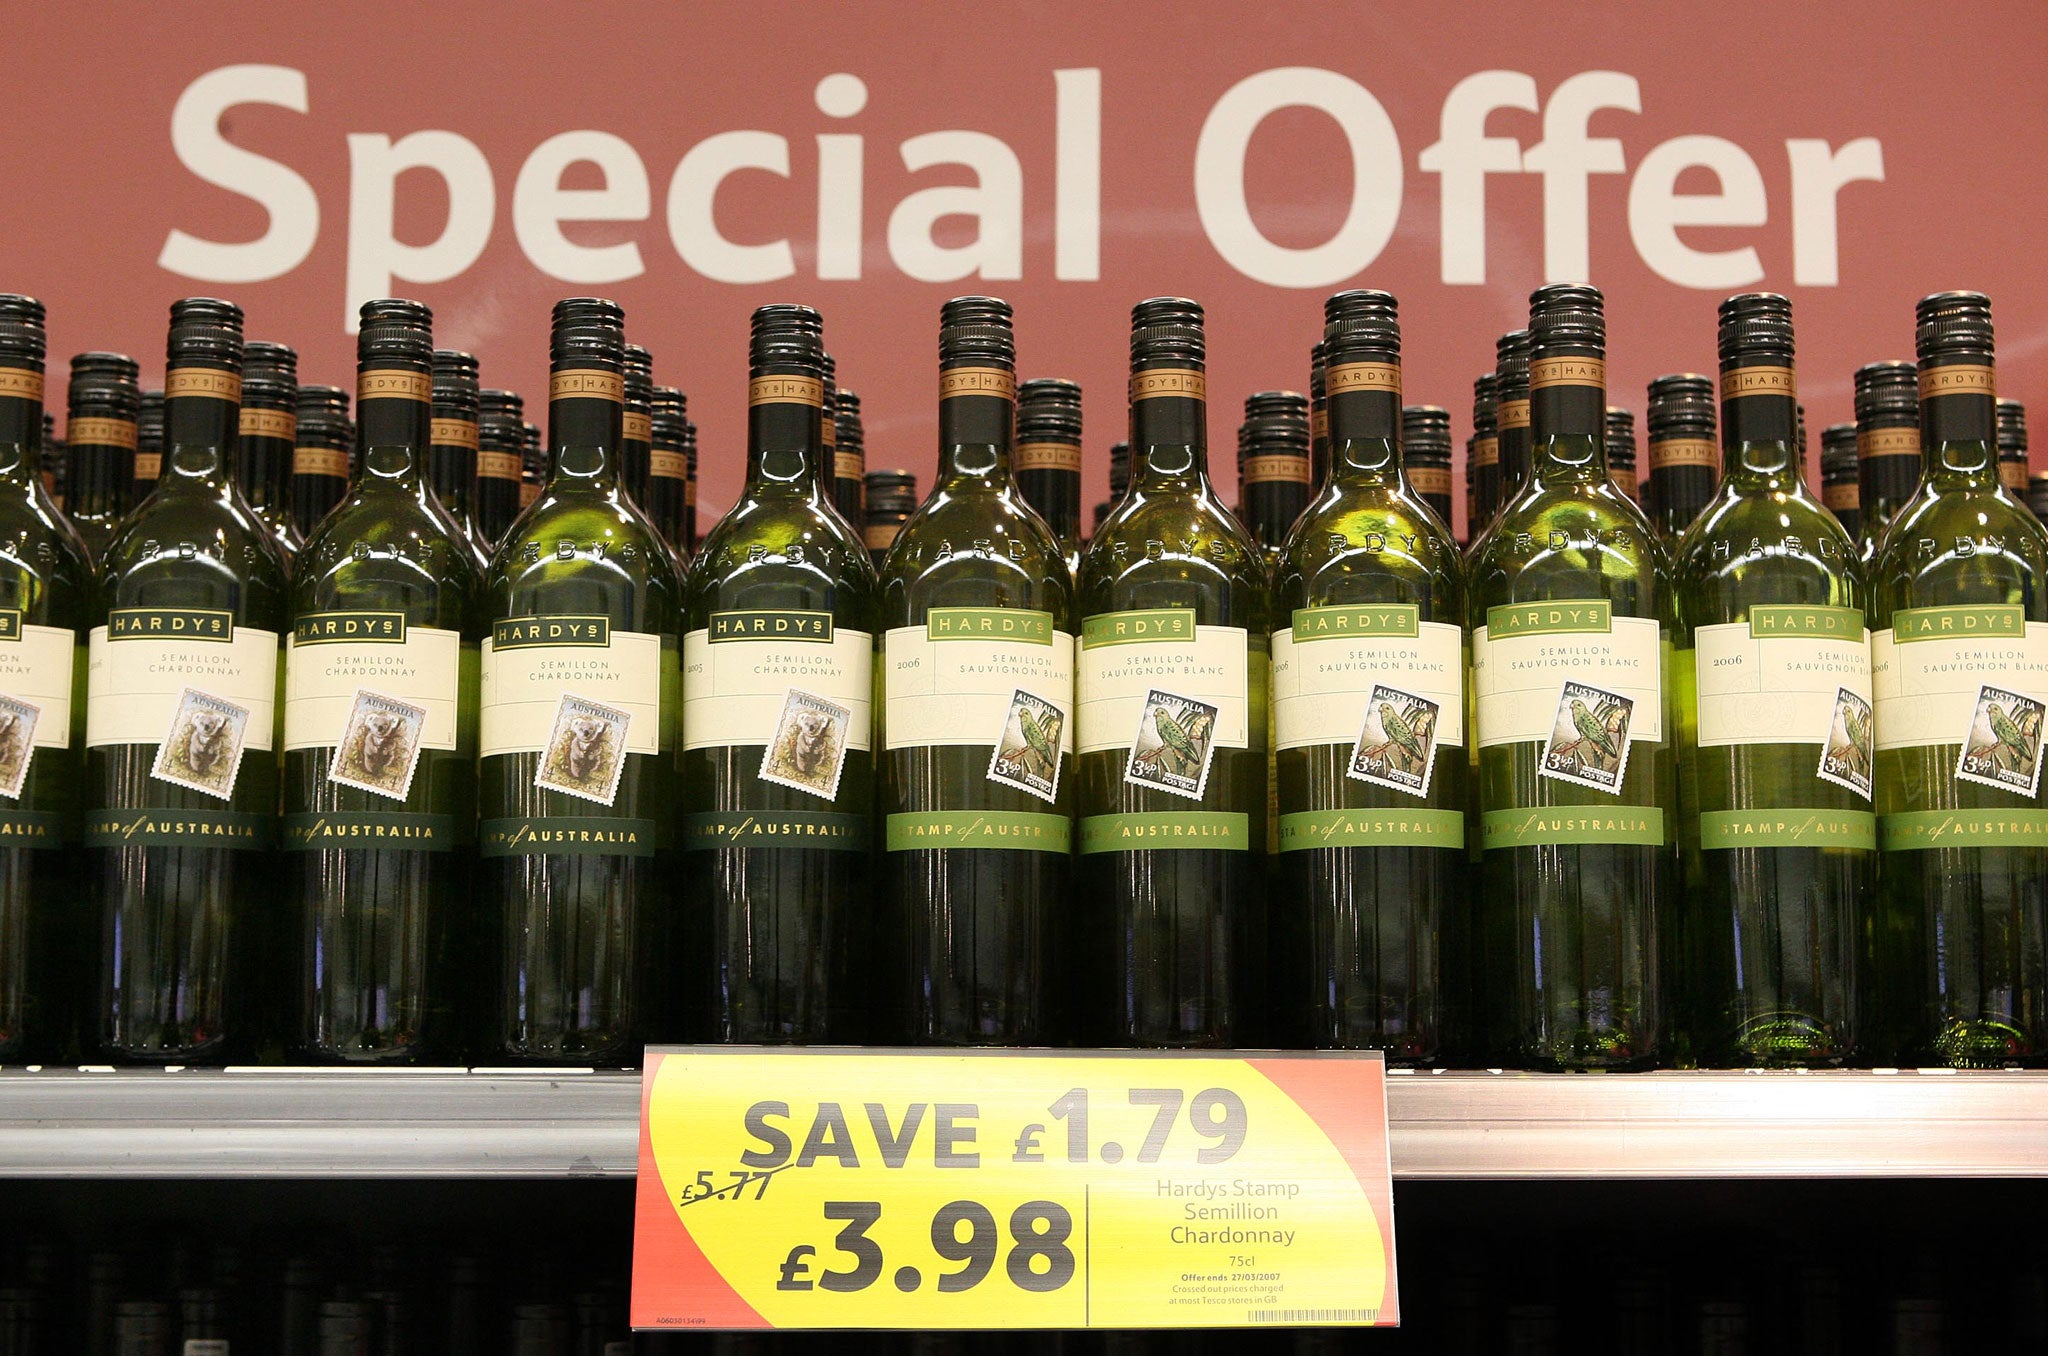 Wine of offer at a Tesco store on February 27, 2007 in London, England. Tesco is the the UK's biggest supermarket chain, with a 31.5% share of the total grocery market.